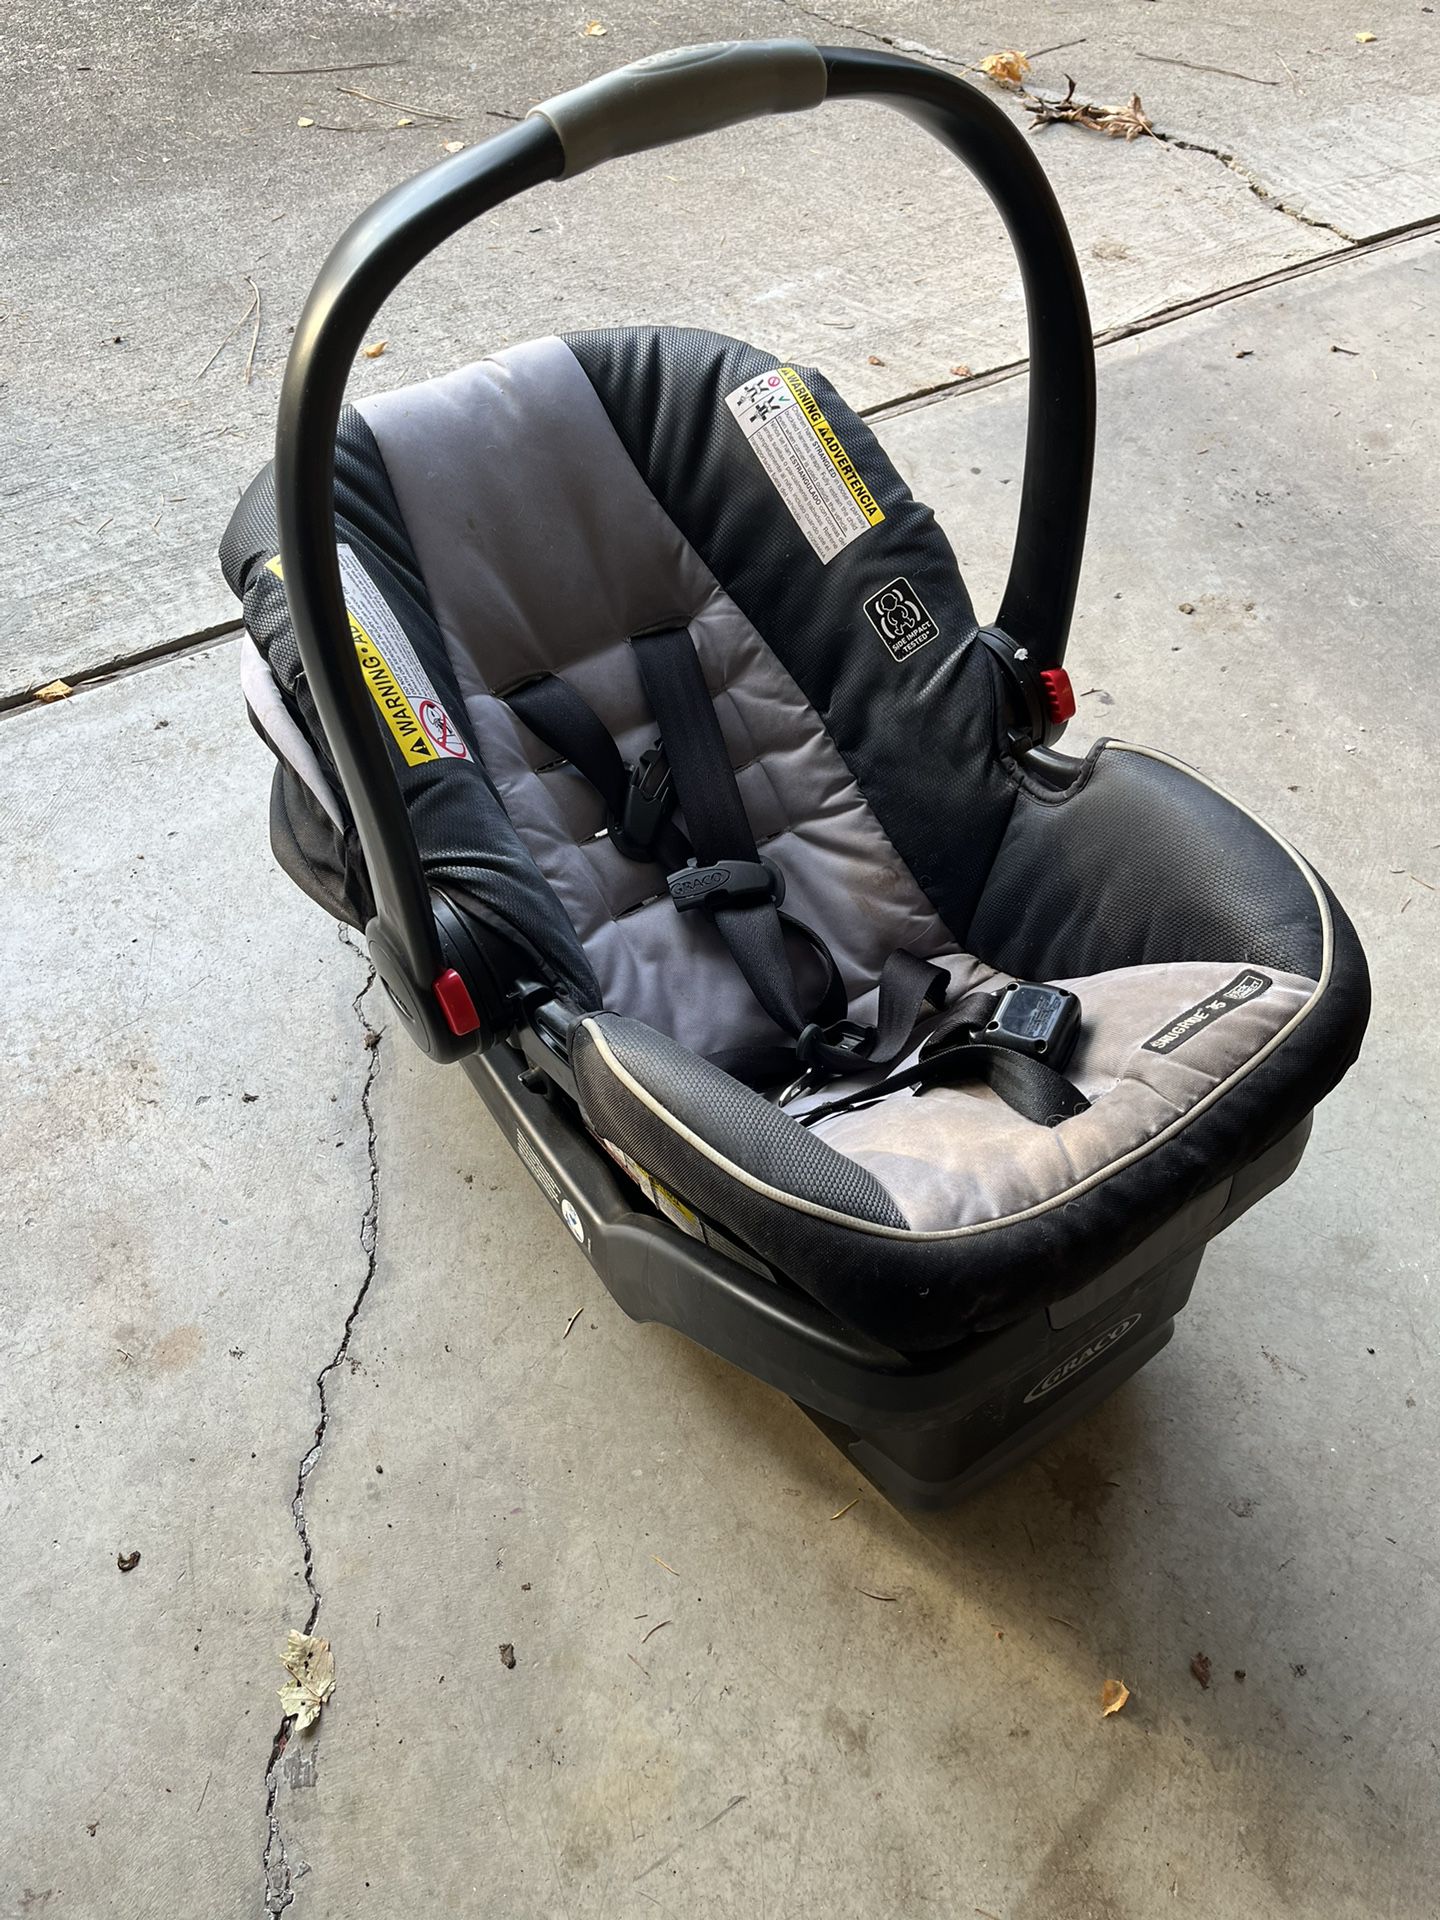 Graco Car Seat With Detachable Base